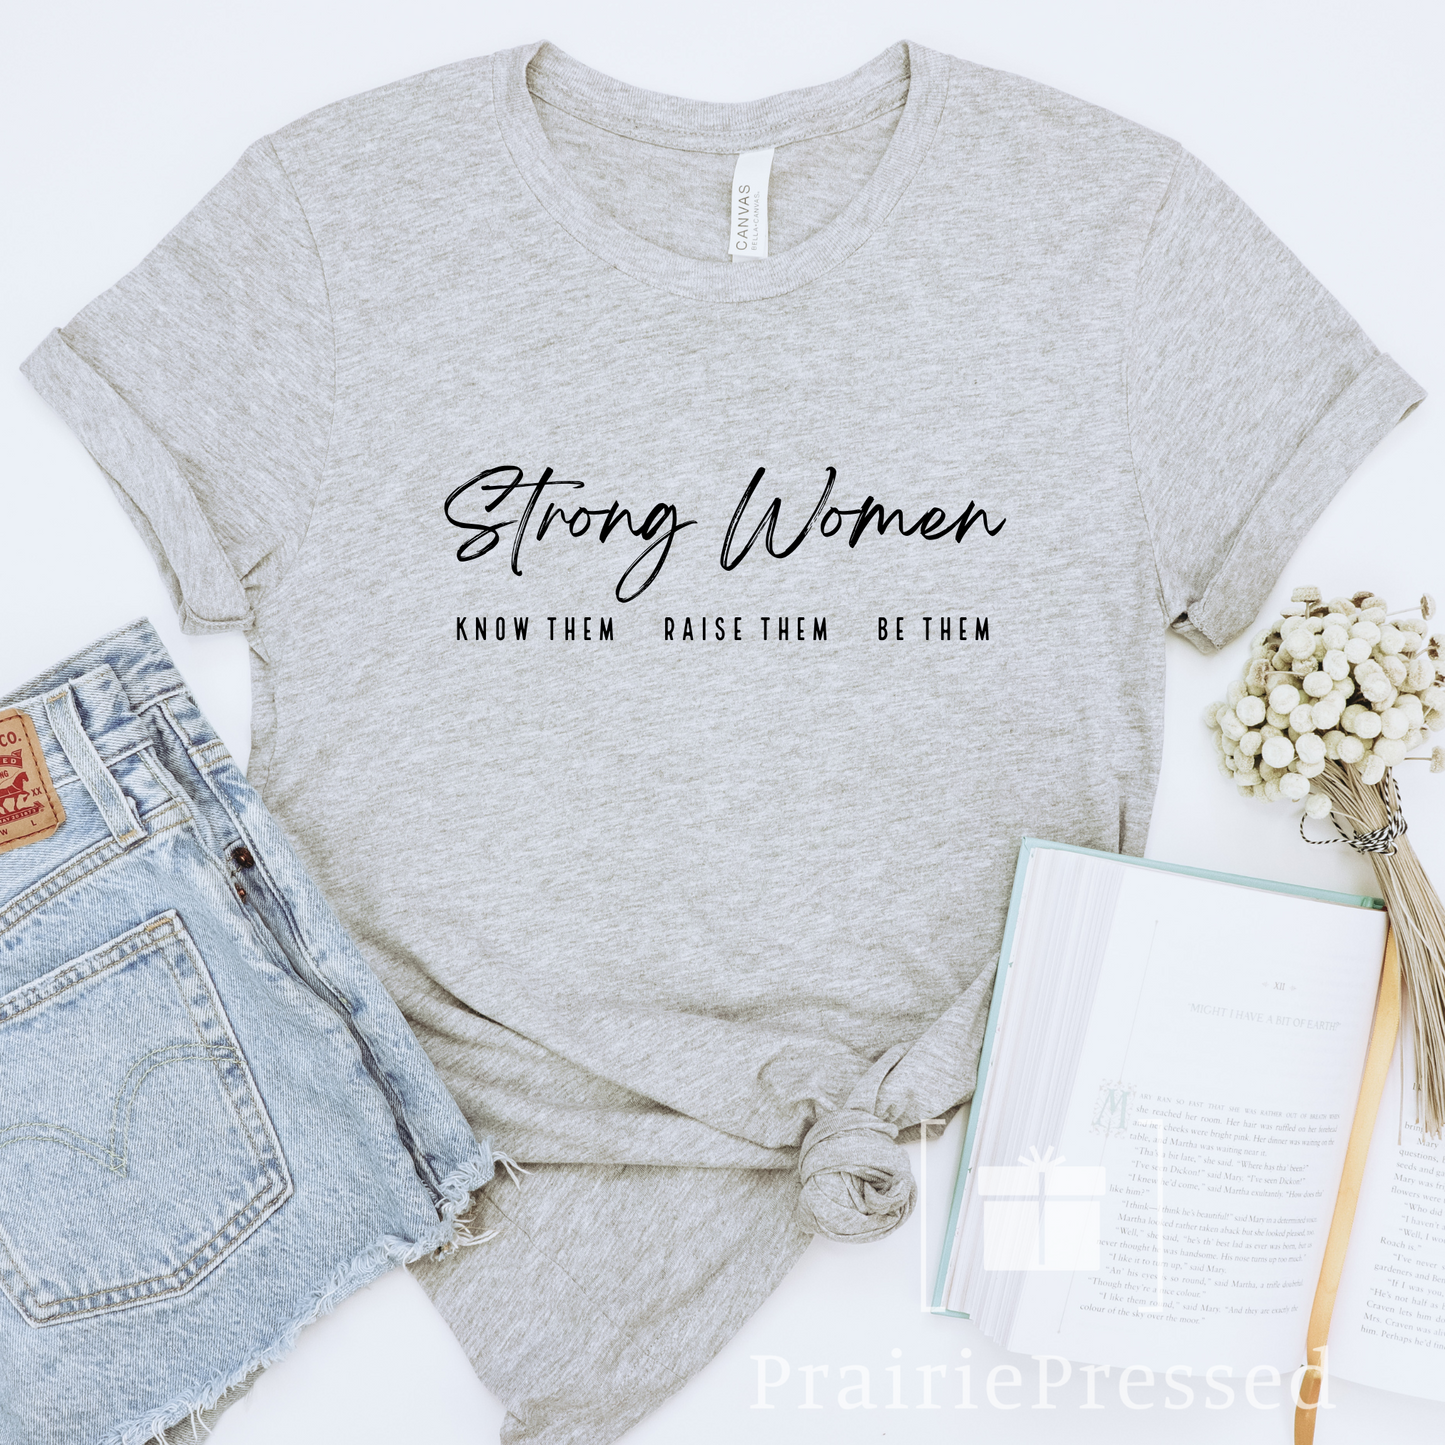 Strong Women - Know them, raise them, be them T Shirt